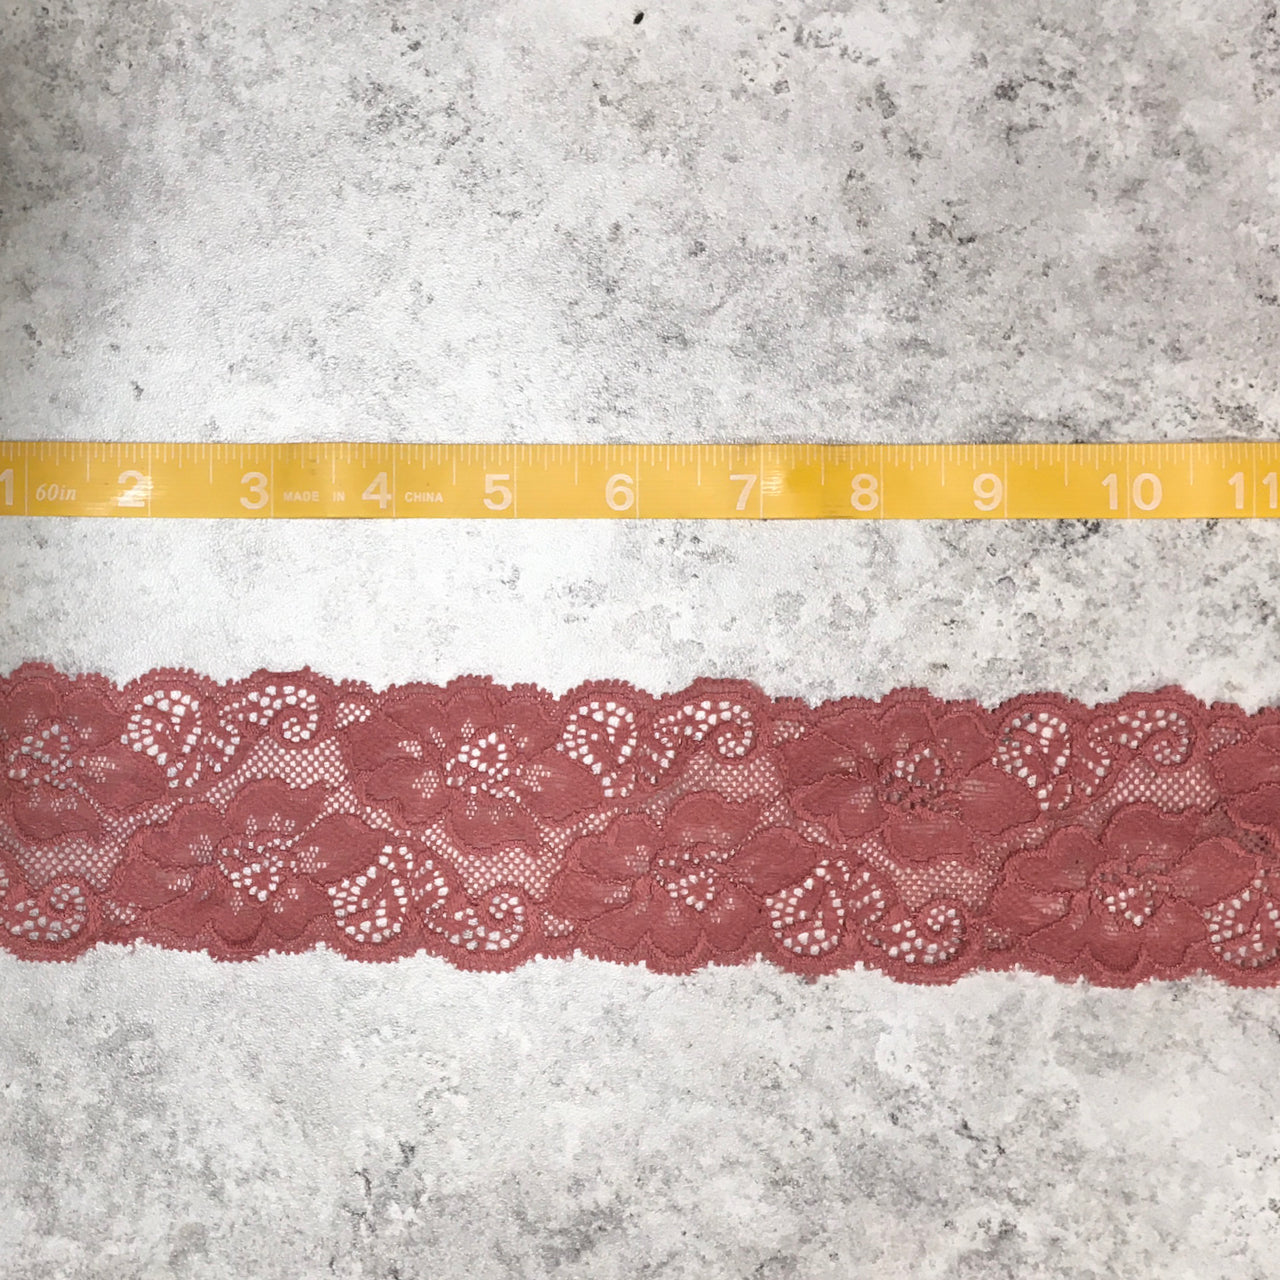 Trim Lace / Pretty Pansies Rose - Sold by the half yard